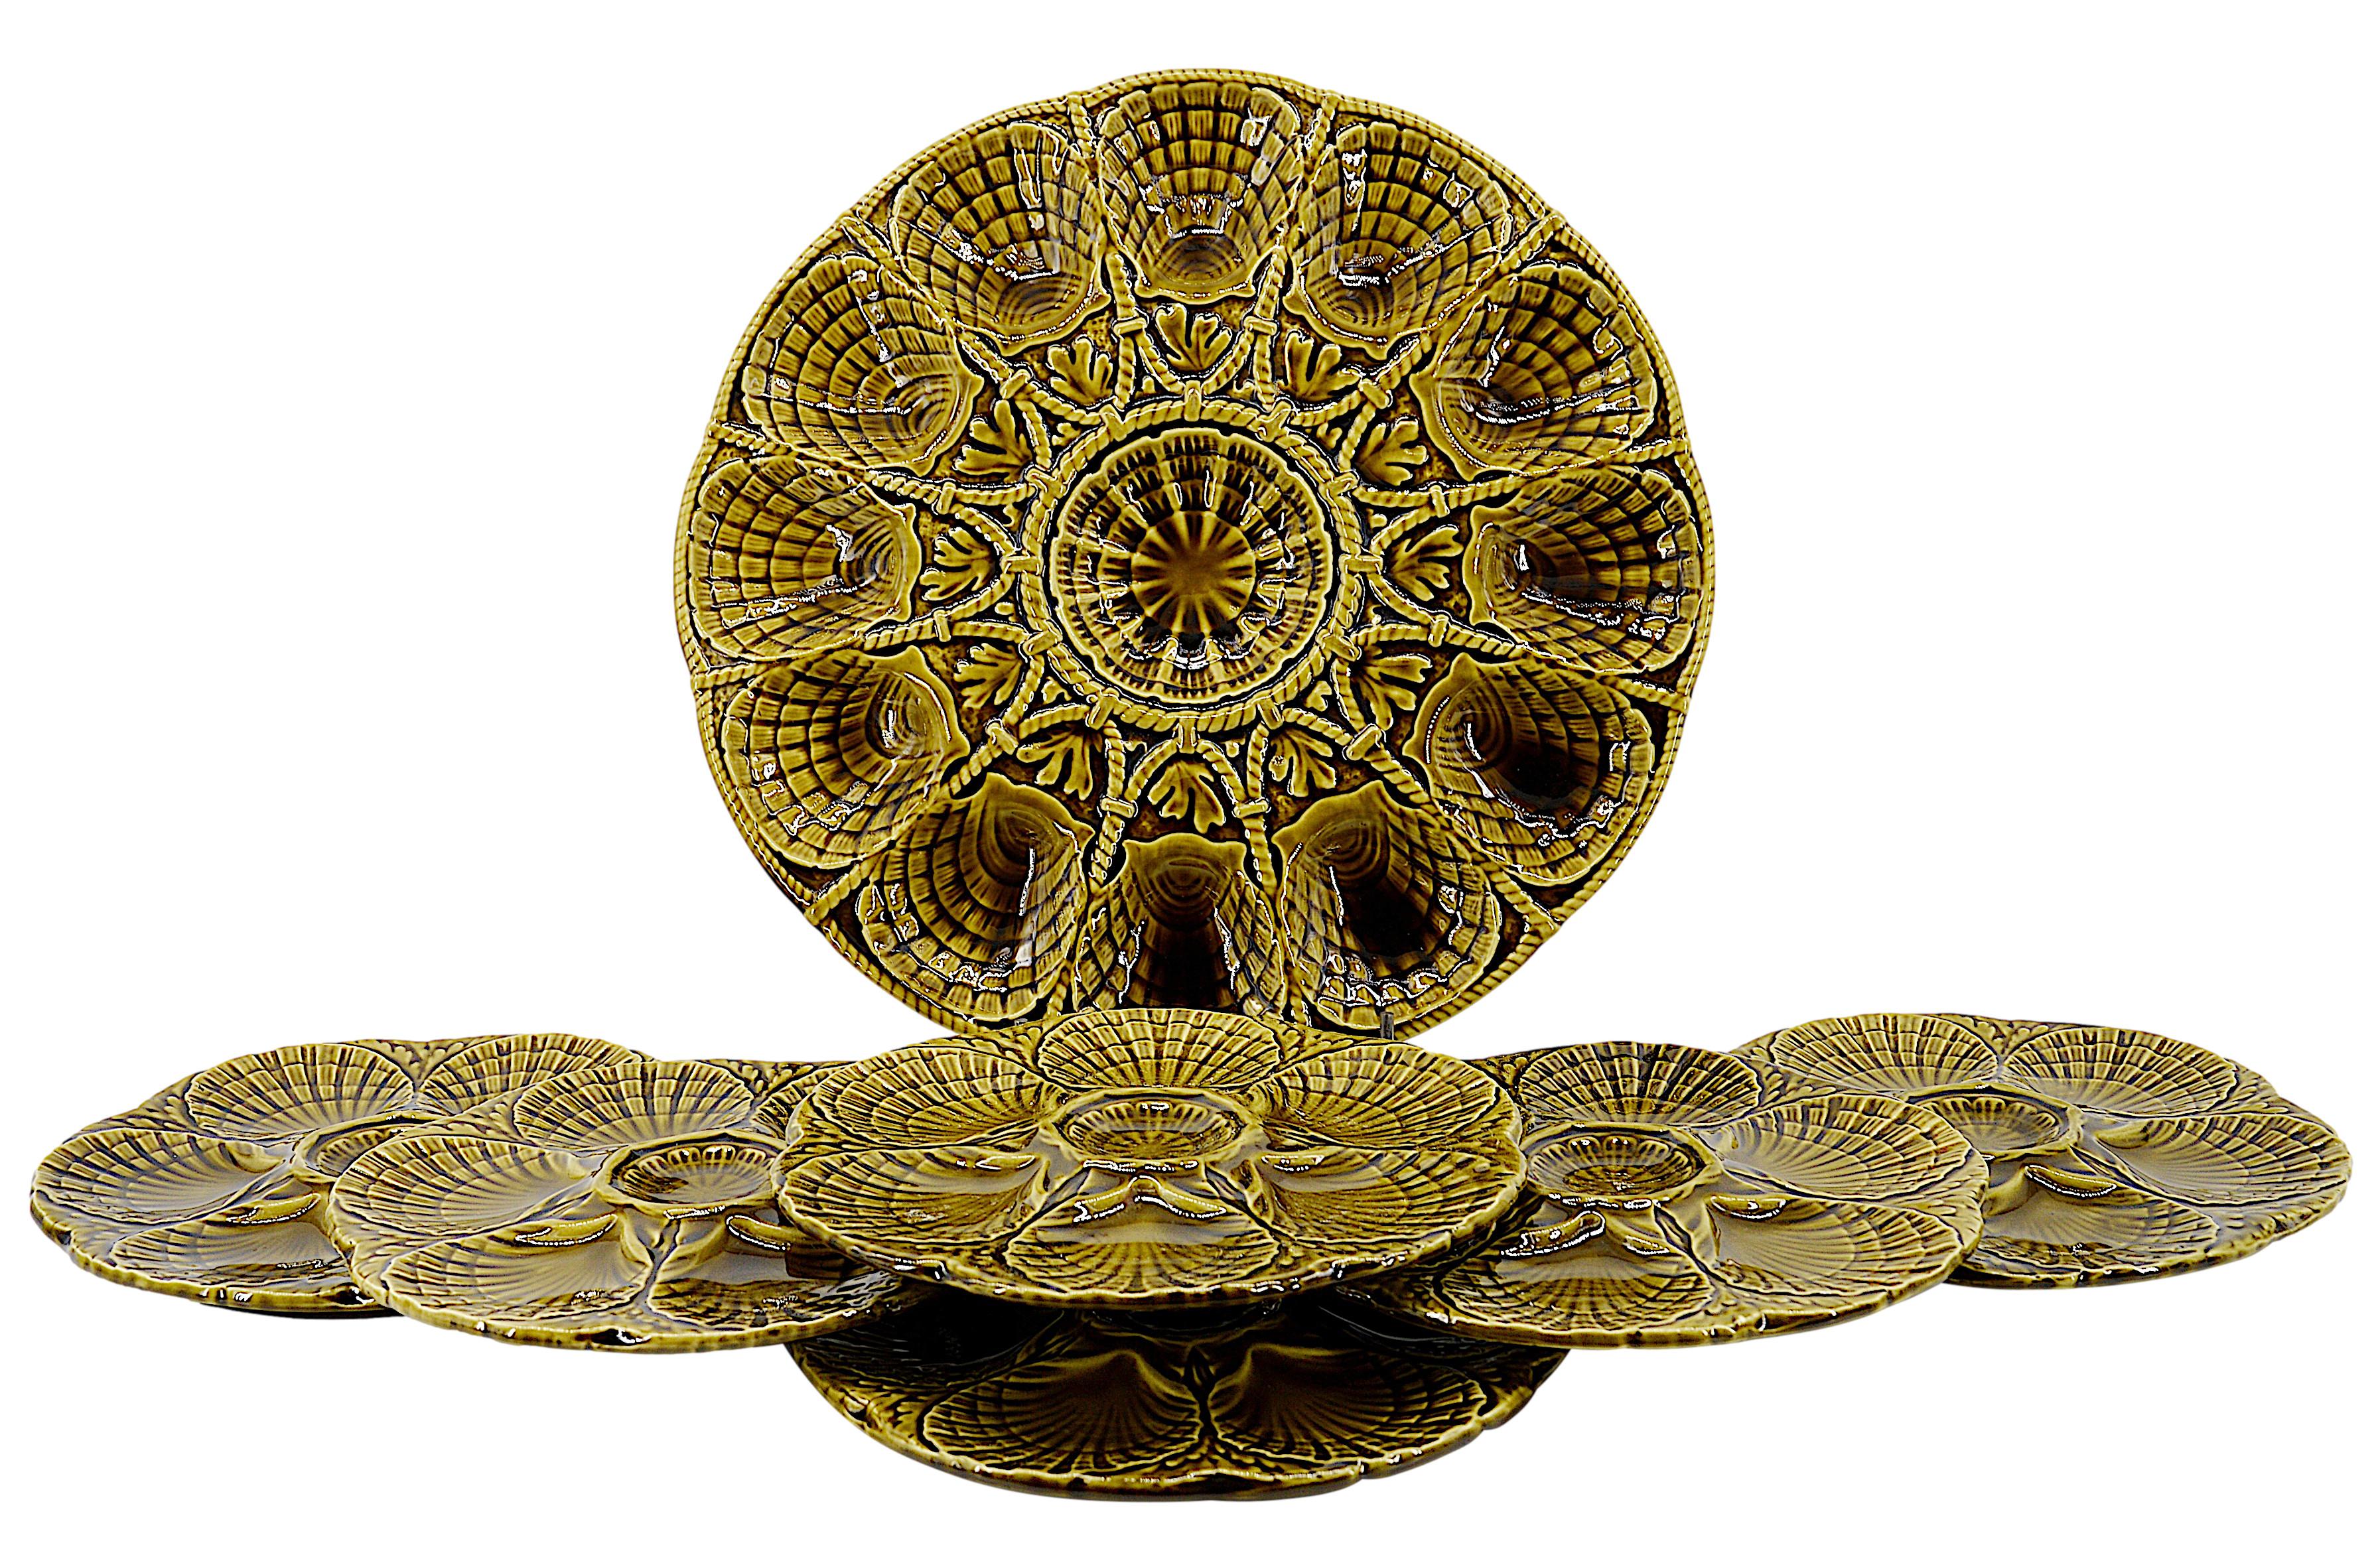 French art ceramic oyster set by Sarreguemines, France, ca.1970. Set composed of a platter and 6 plates in excellent condition. Measurements : Platter - Diameter : 37.5cm - 14.8 inches, height : 3cm - 1.22 inch ; Plate - Diameter, : 23.5cm - 9.25